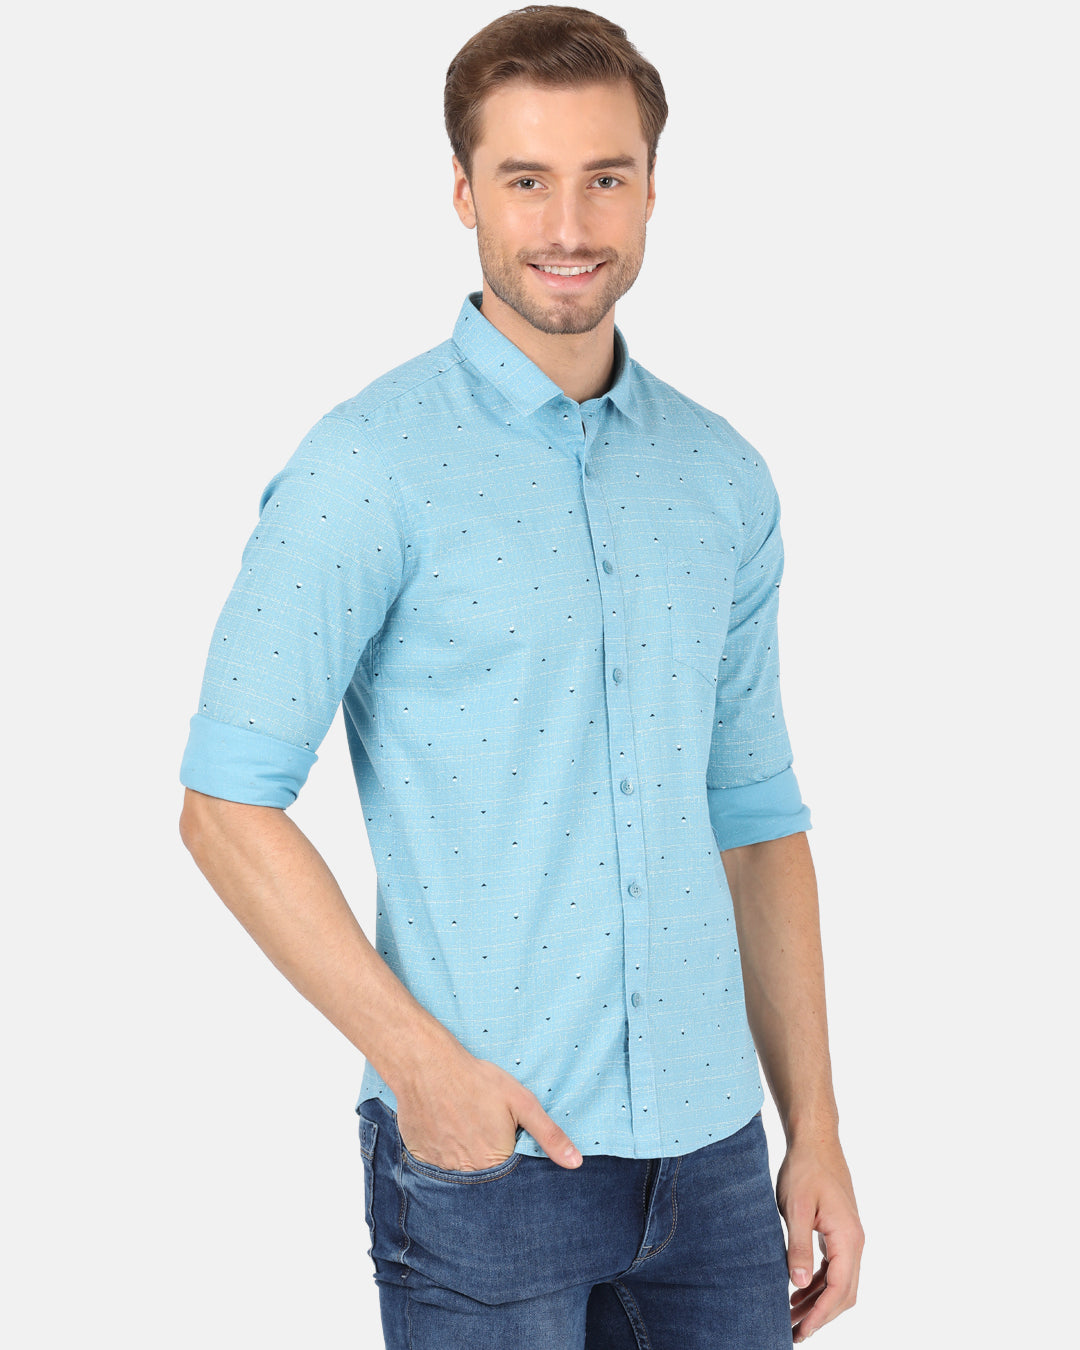 Crocodile Casual Full Sleeve Slim Fit Printed Sky Blue with Collar Shirt for Men